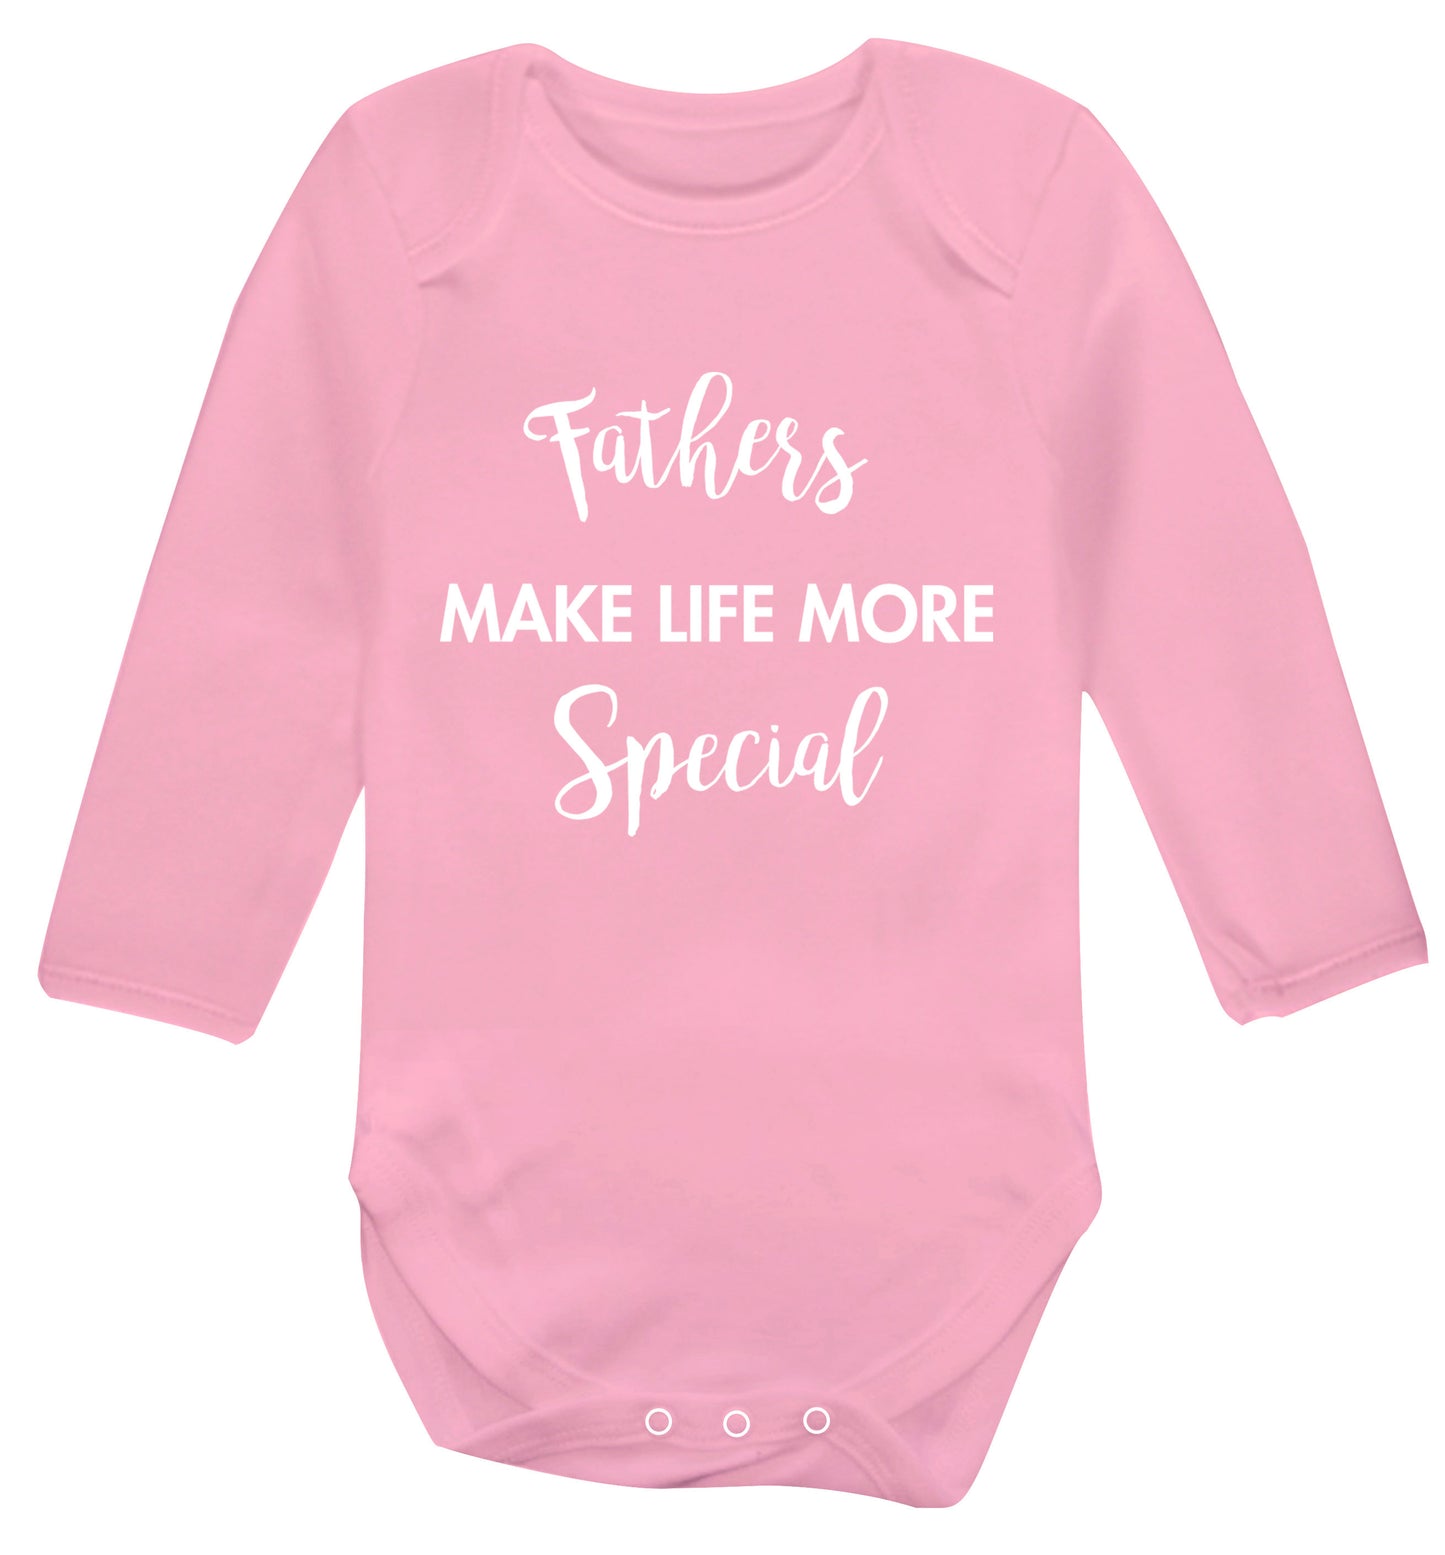 Fathers make life more special Baby Vest long sleeved pale pink 6-12 months